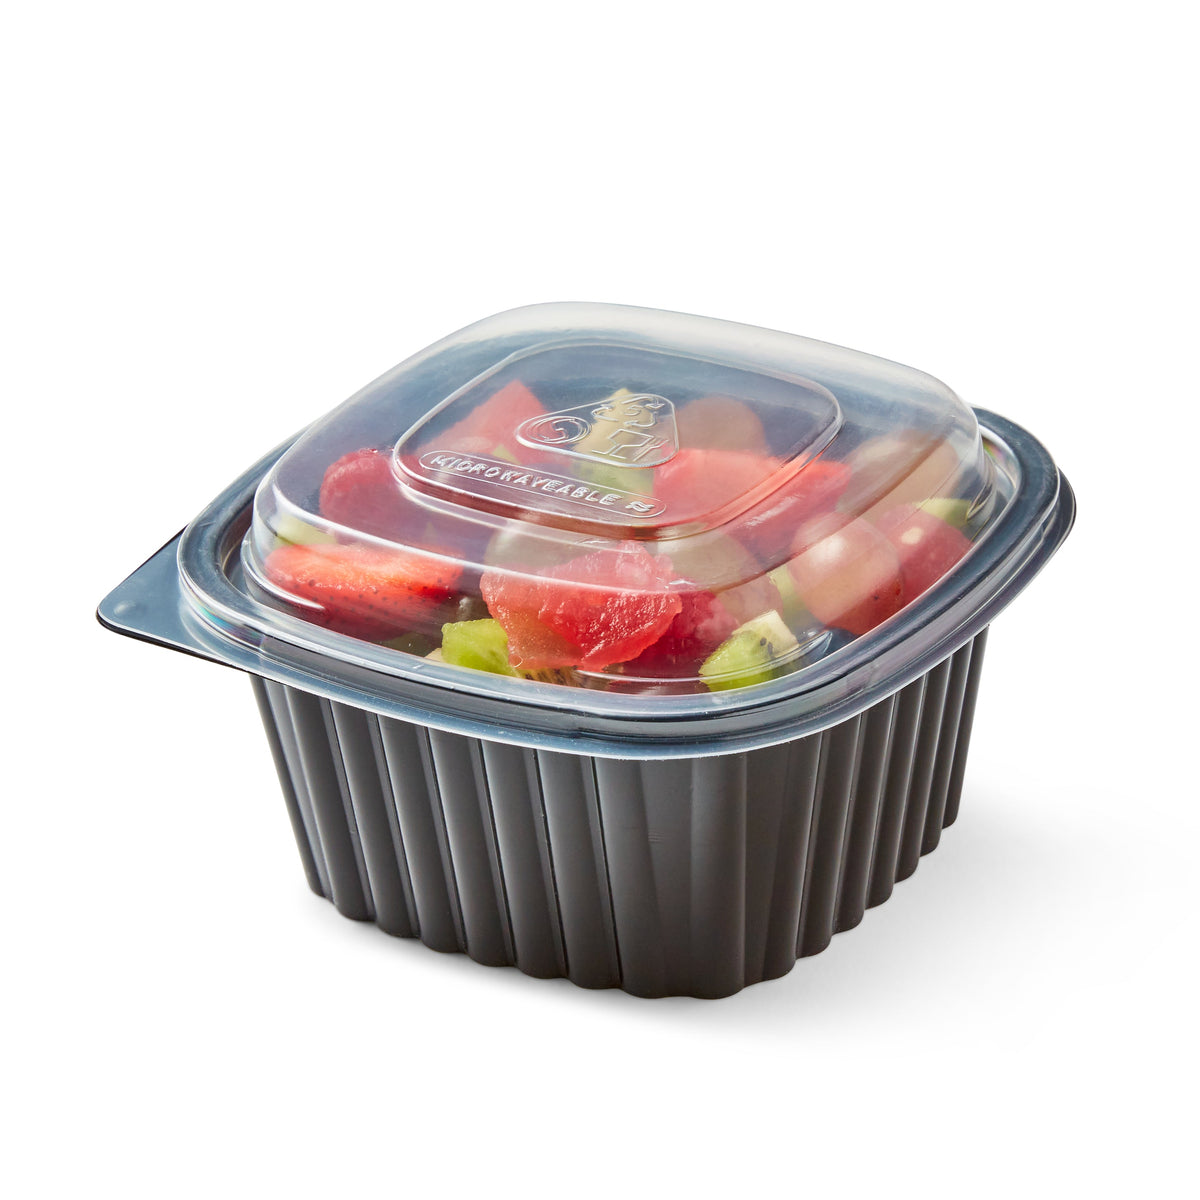 20 x 560 ml (19.7 ounce) Microwavable Meal Prep Hot Food Containers & Lids (137mm x 137mm x 80mm)